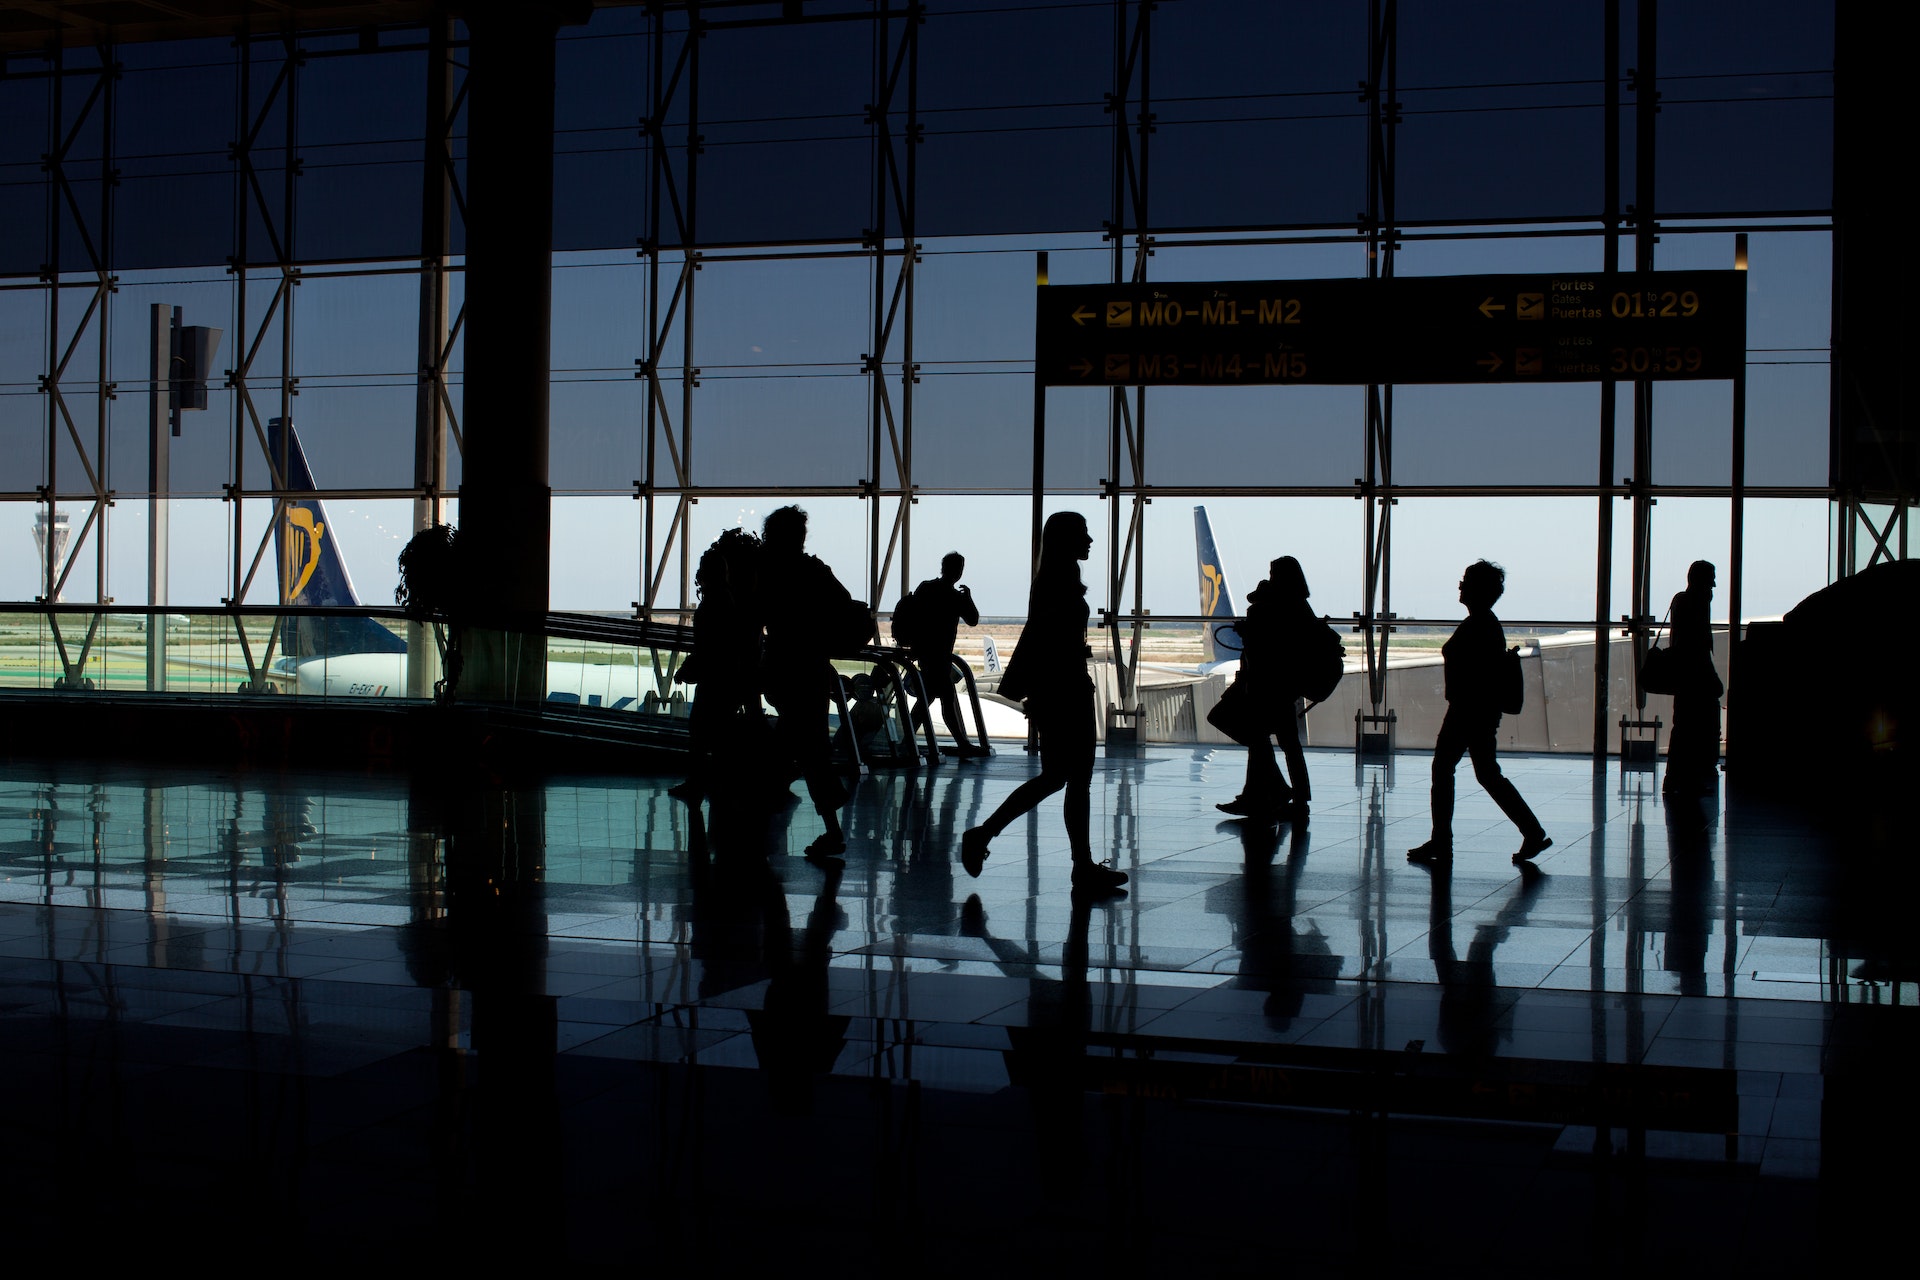 People walking through an airport with large windows in the background